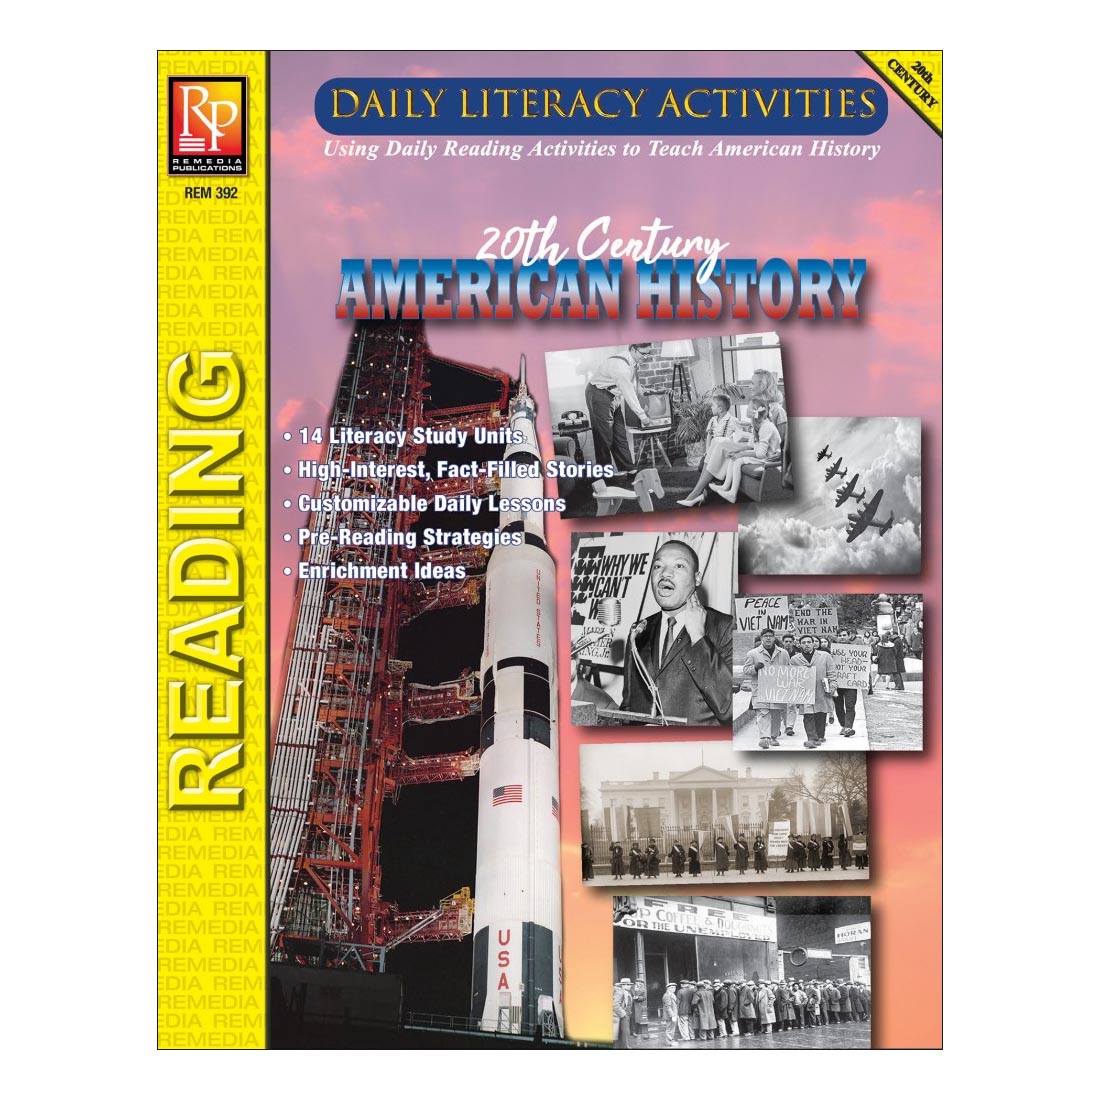 Daily Literacy Activities: 20th Century American History